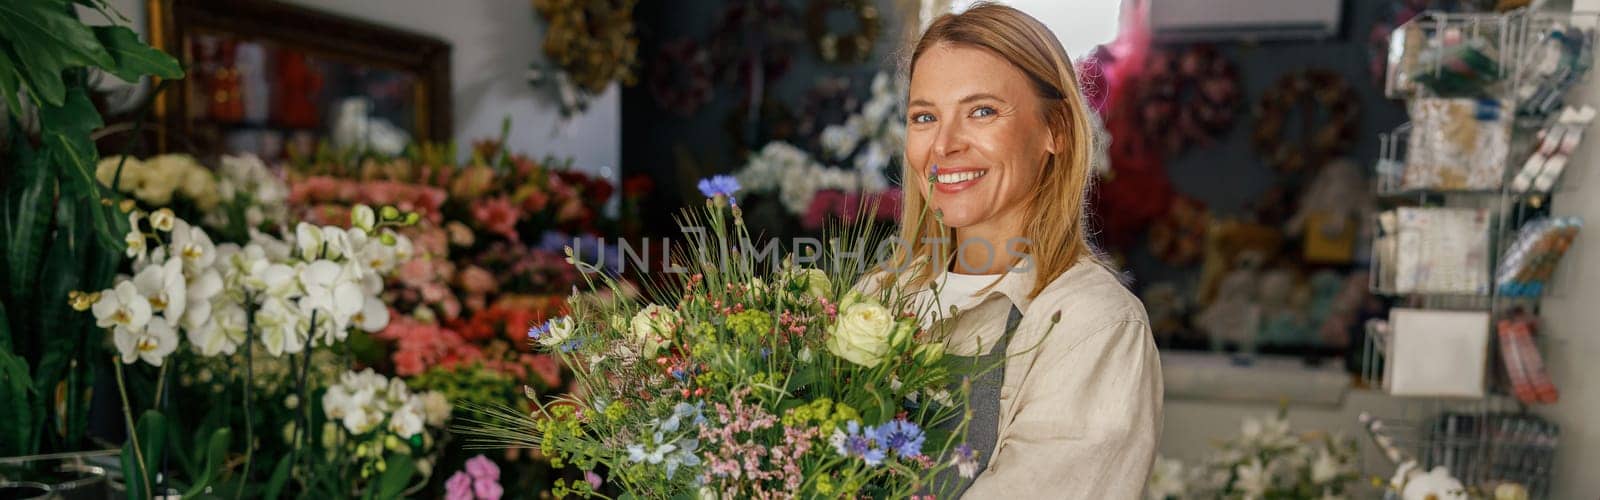 Attractive woman flower shop owner in apron holding bouquet of flowers at florist store